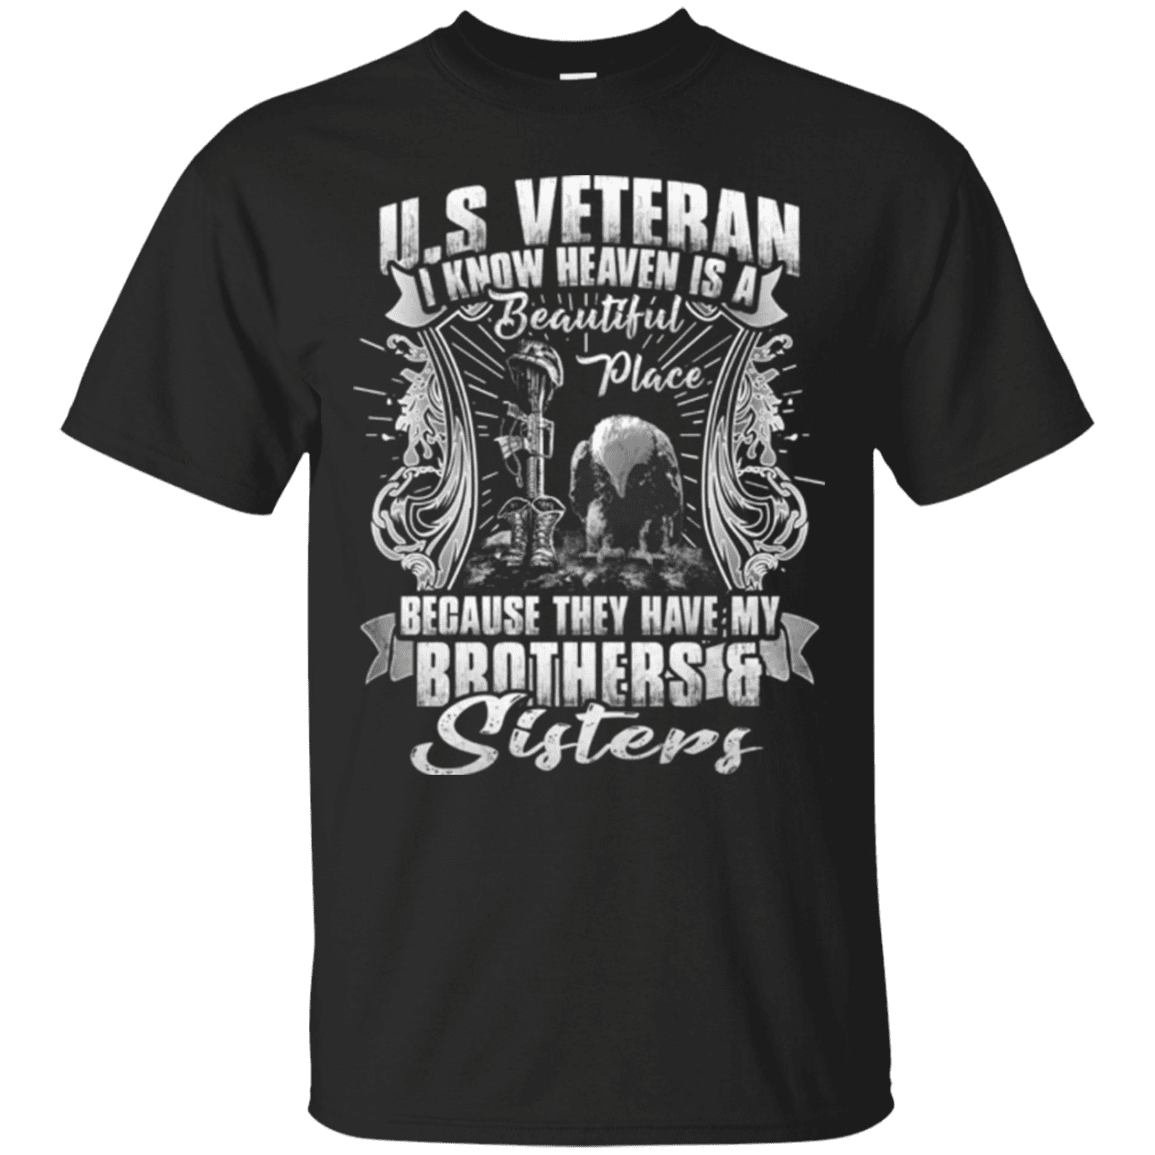 Military T-Shirt "HEAVEN IS THE BEAUTIFUL PLACE WITH BROTHERS AND SISTERS VETERAN"-TShirt-General-Veterans Nation